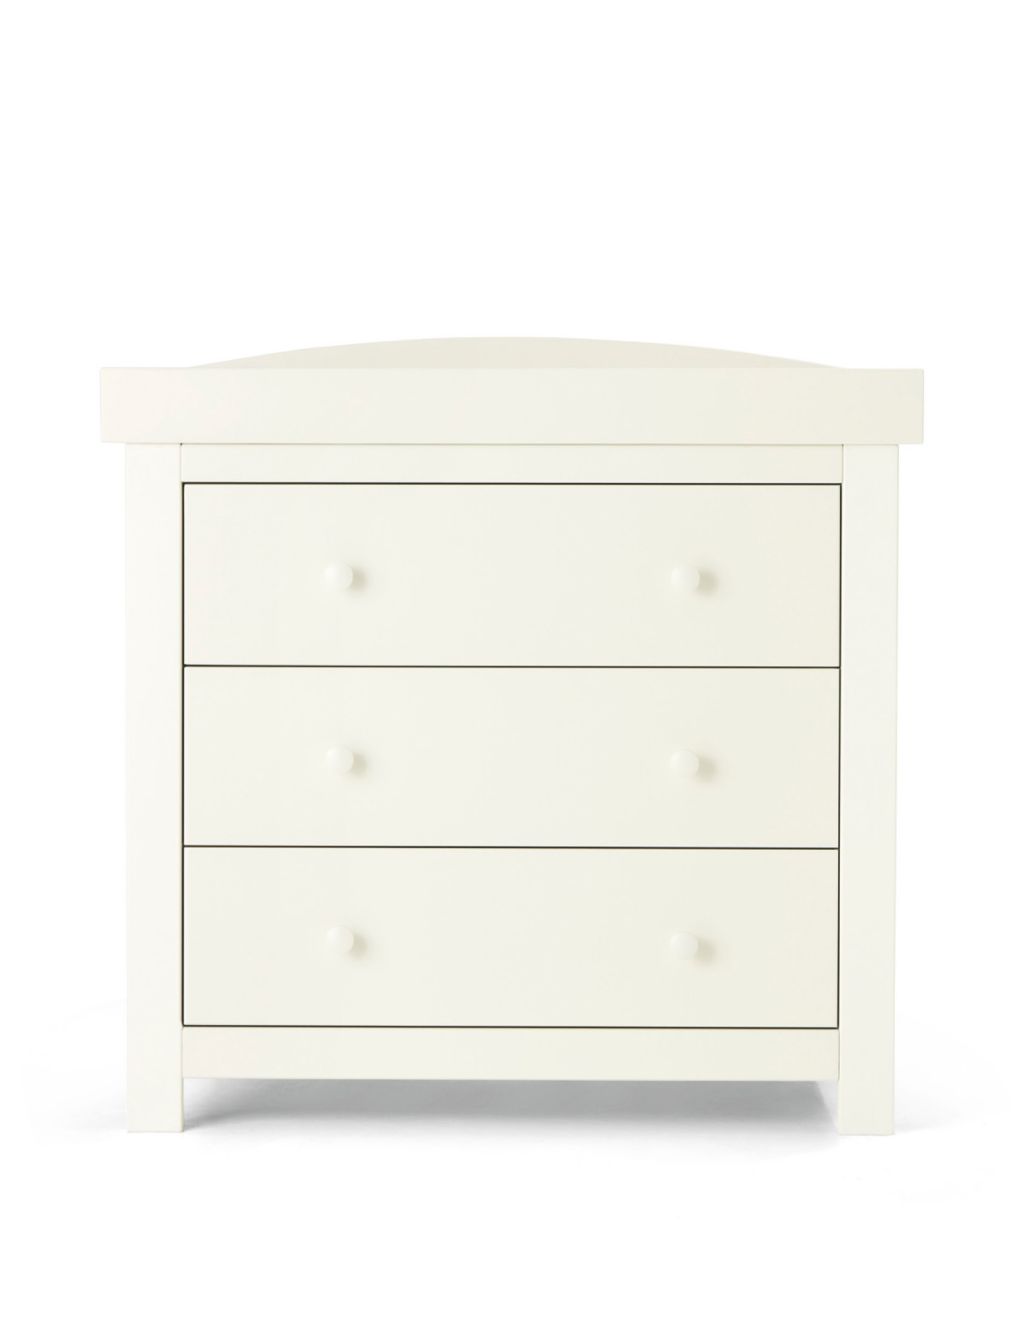 Mia 3 Piece Cotbed Range with Dresser and Wardrobe image 4